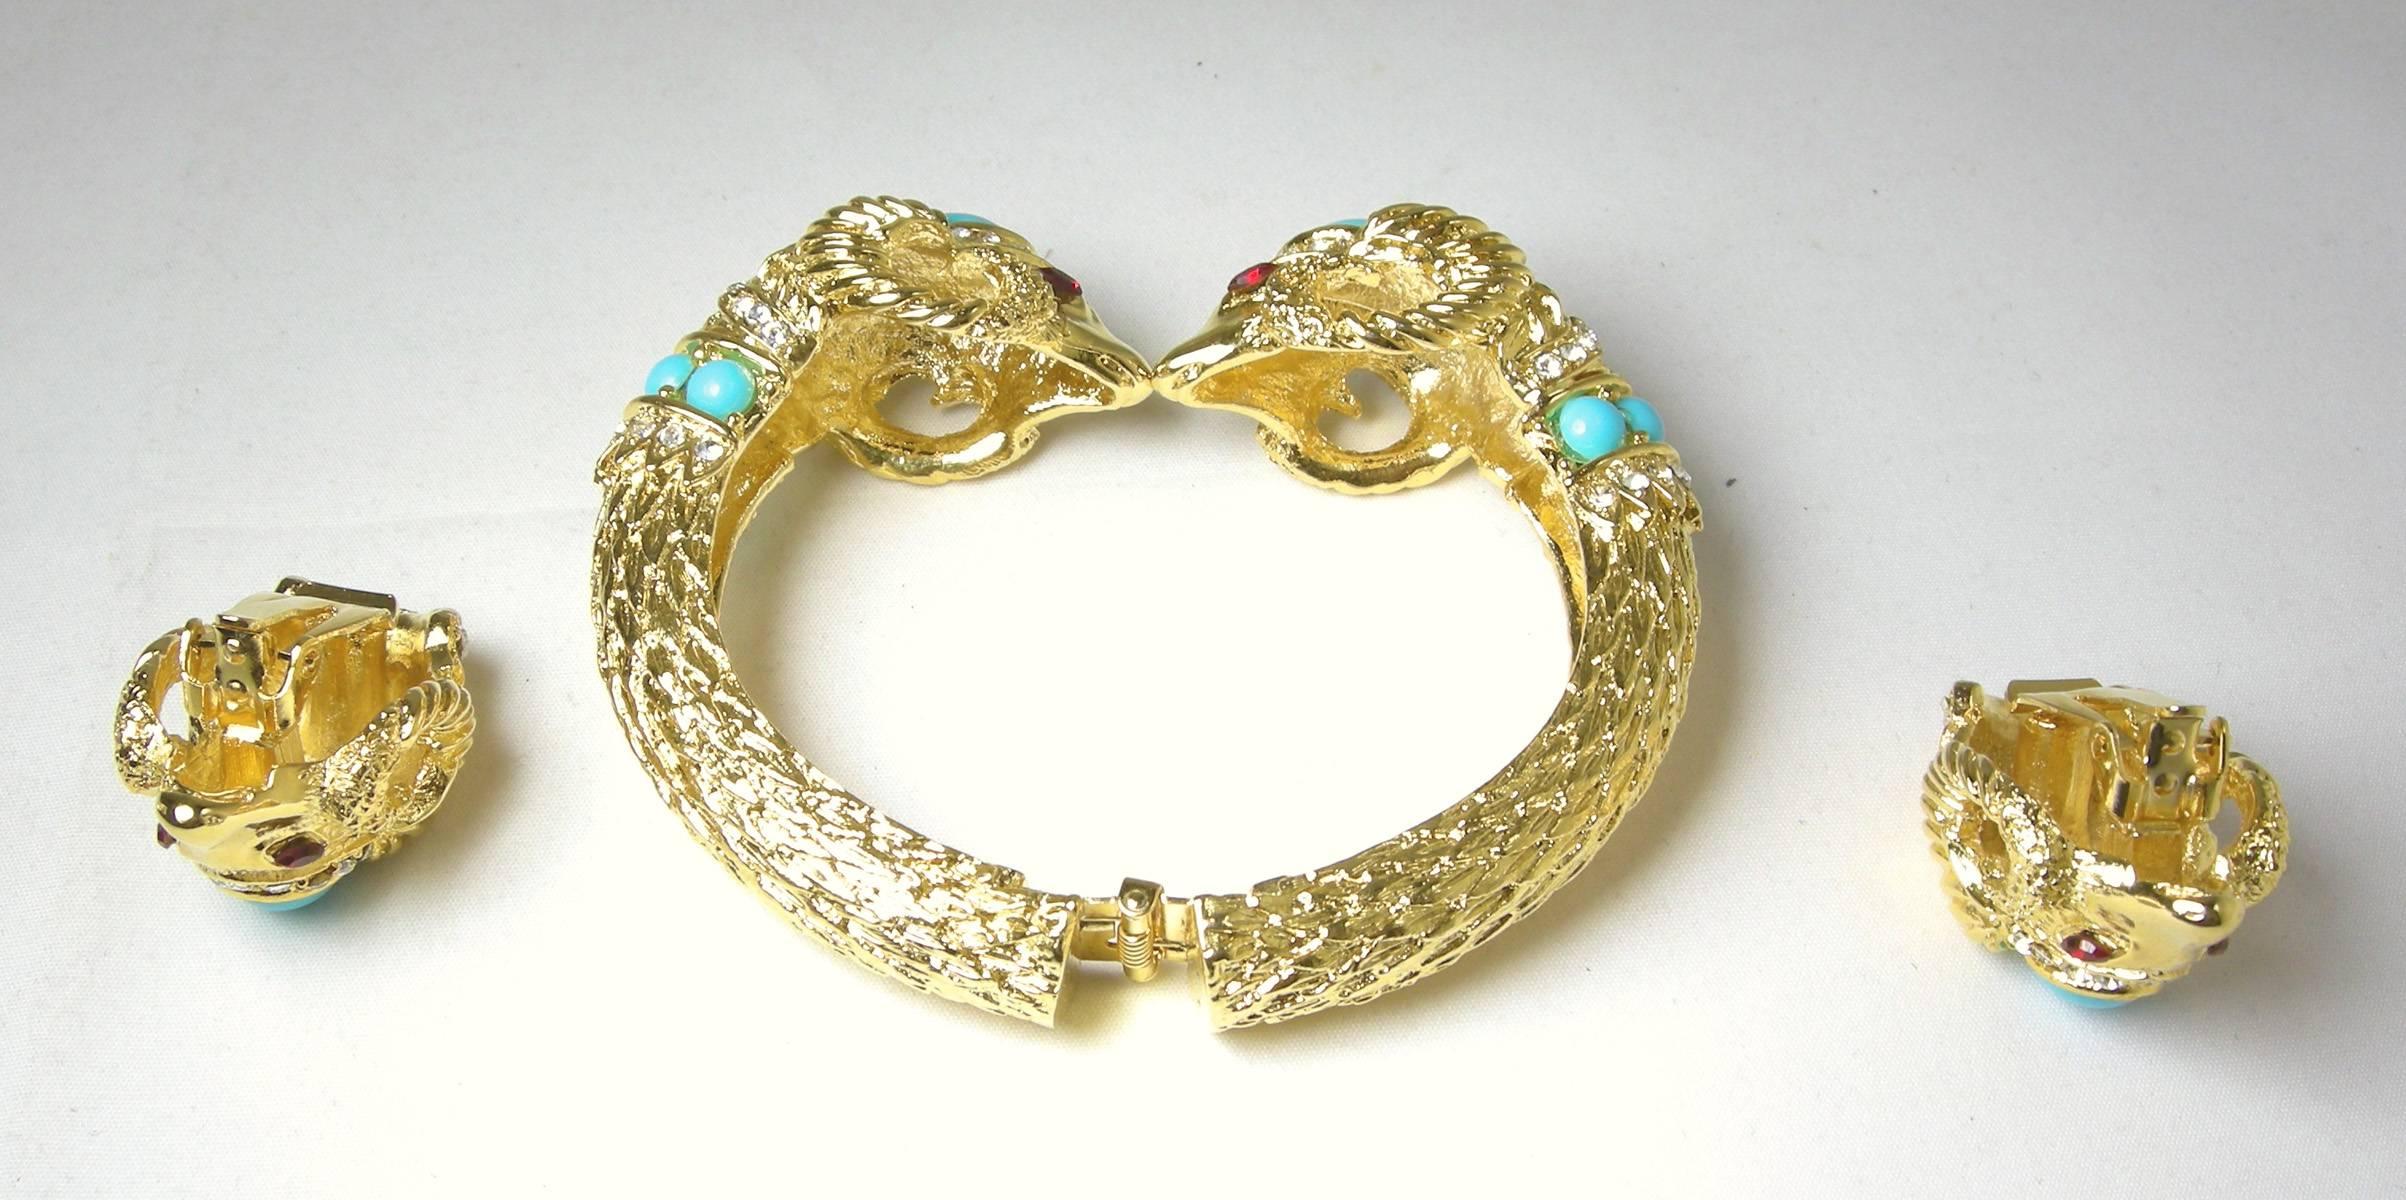 This Kenneth Jay Lane Ram bracelet is adorned with faux turquoise and clear colored crystals.  It has ruby colored crystals for eyes. The bracelet is set in a brilliant gold tone setting and has an etched snake like pattern. It measures 8” x 1-1/4”